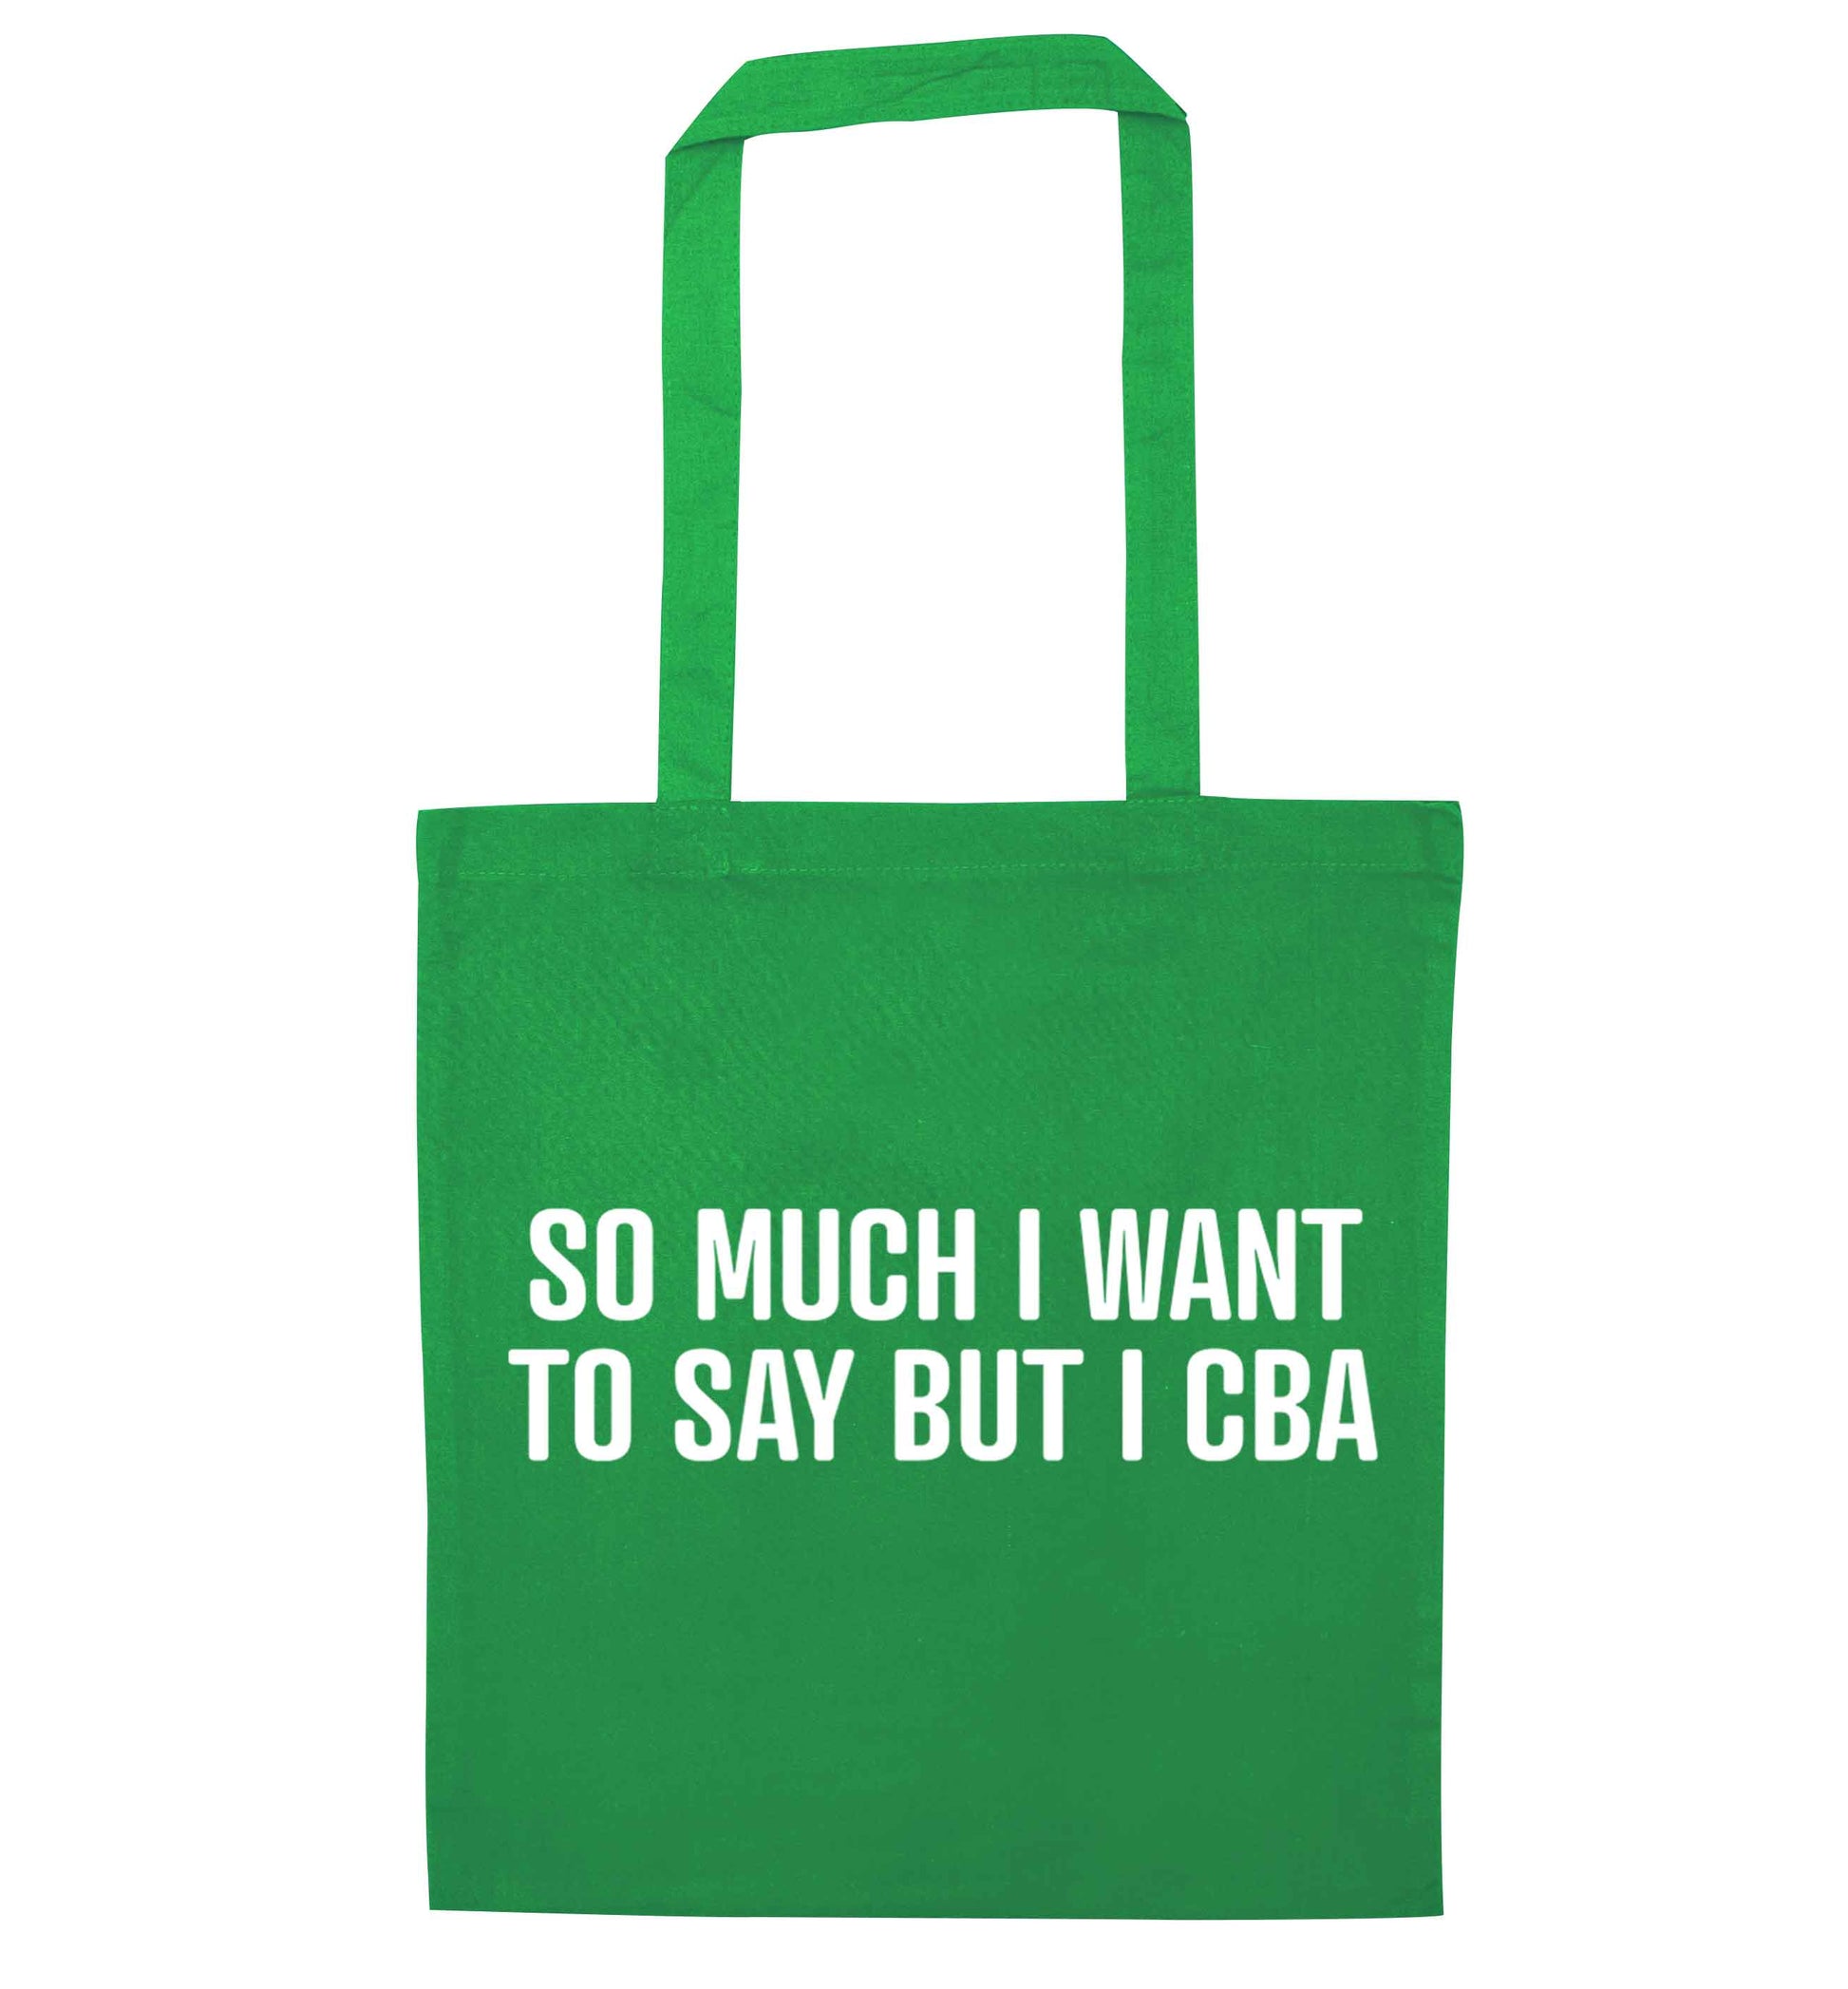 So much I want to say I cba  green tote bag